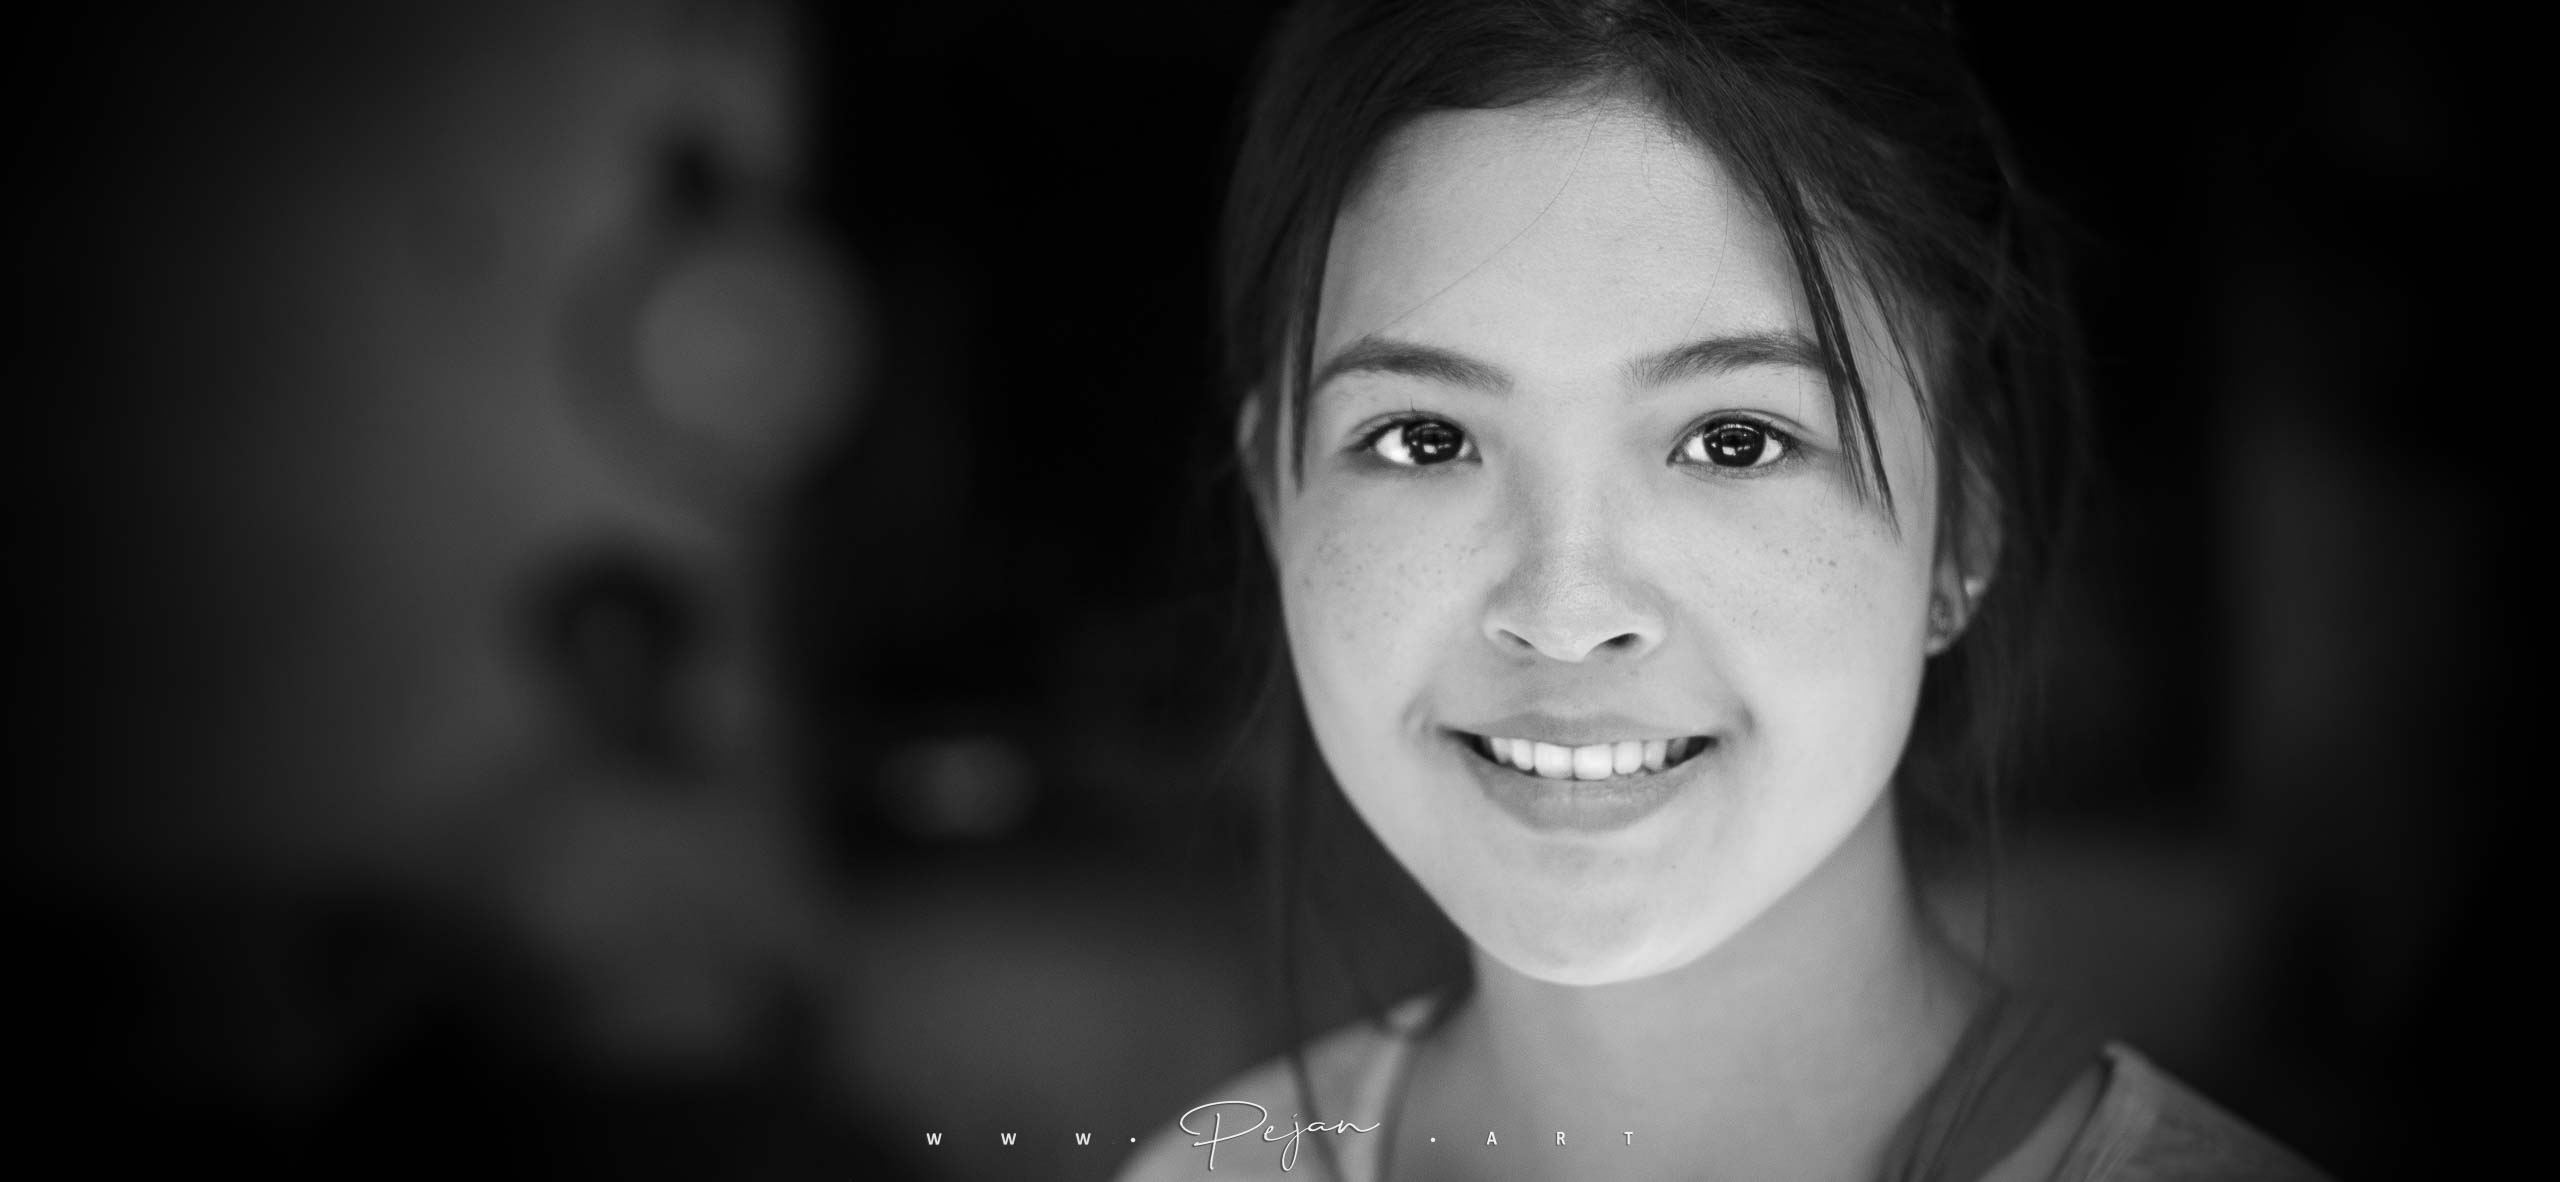 Monochrome portrait - Beautiful smile of a young woman in Shan State, Myanmar